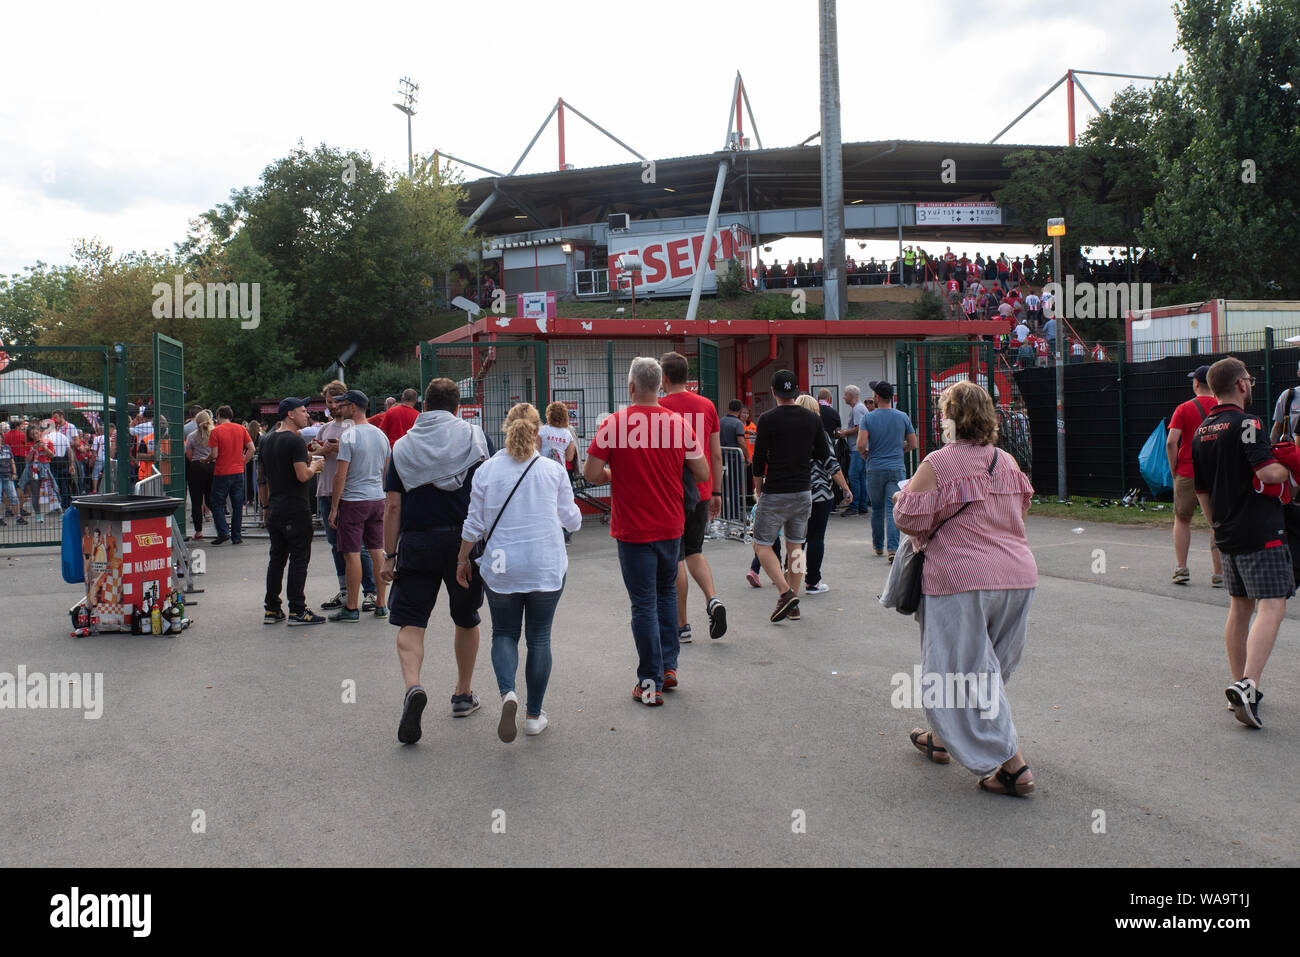 Today was the first time ever that Union Berlin played in the Bundesliga (against RB Leipzig) and their supporters turned out in great numbers. Stock Photo